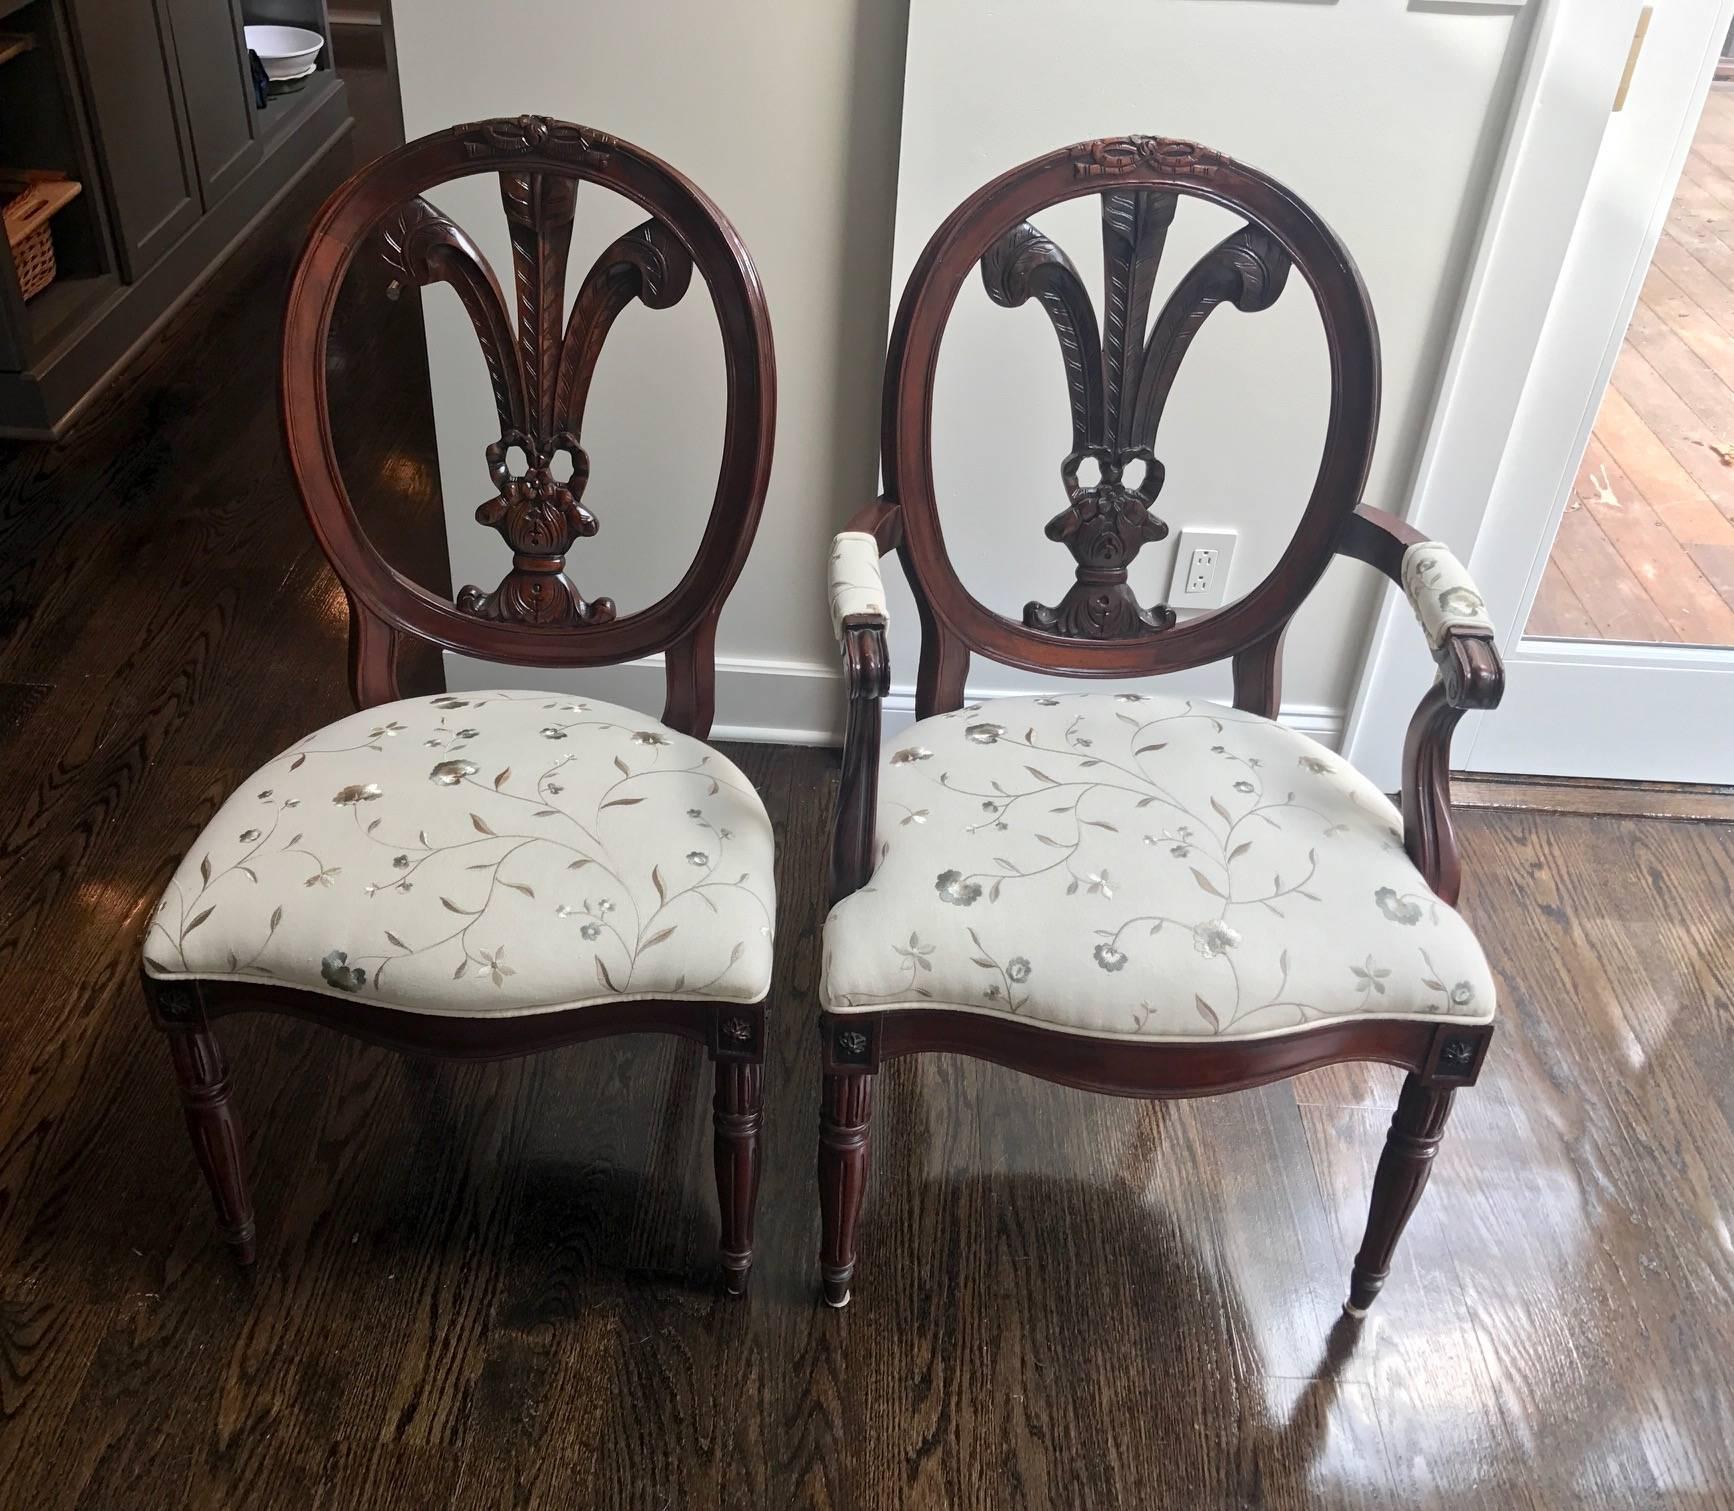  Set of Seven Dining Chairs.  Beautifully Carved Feather Back Louis XVI Style Mahogany Dining Chairs. Beautifully done. 

Priced to Sell. 

Measures: Seat height - 18 inches.